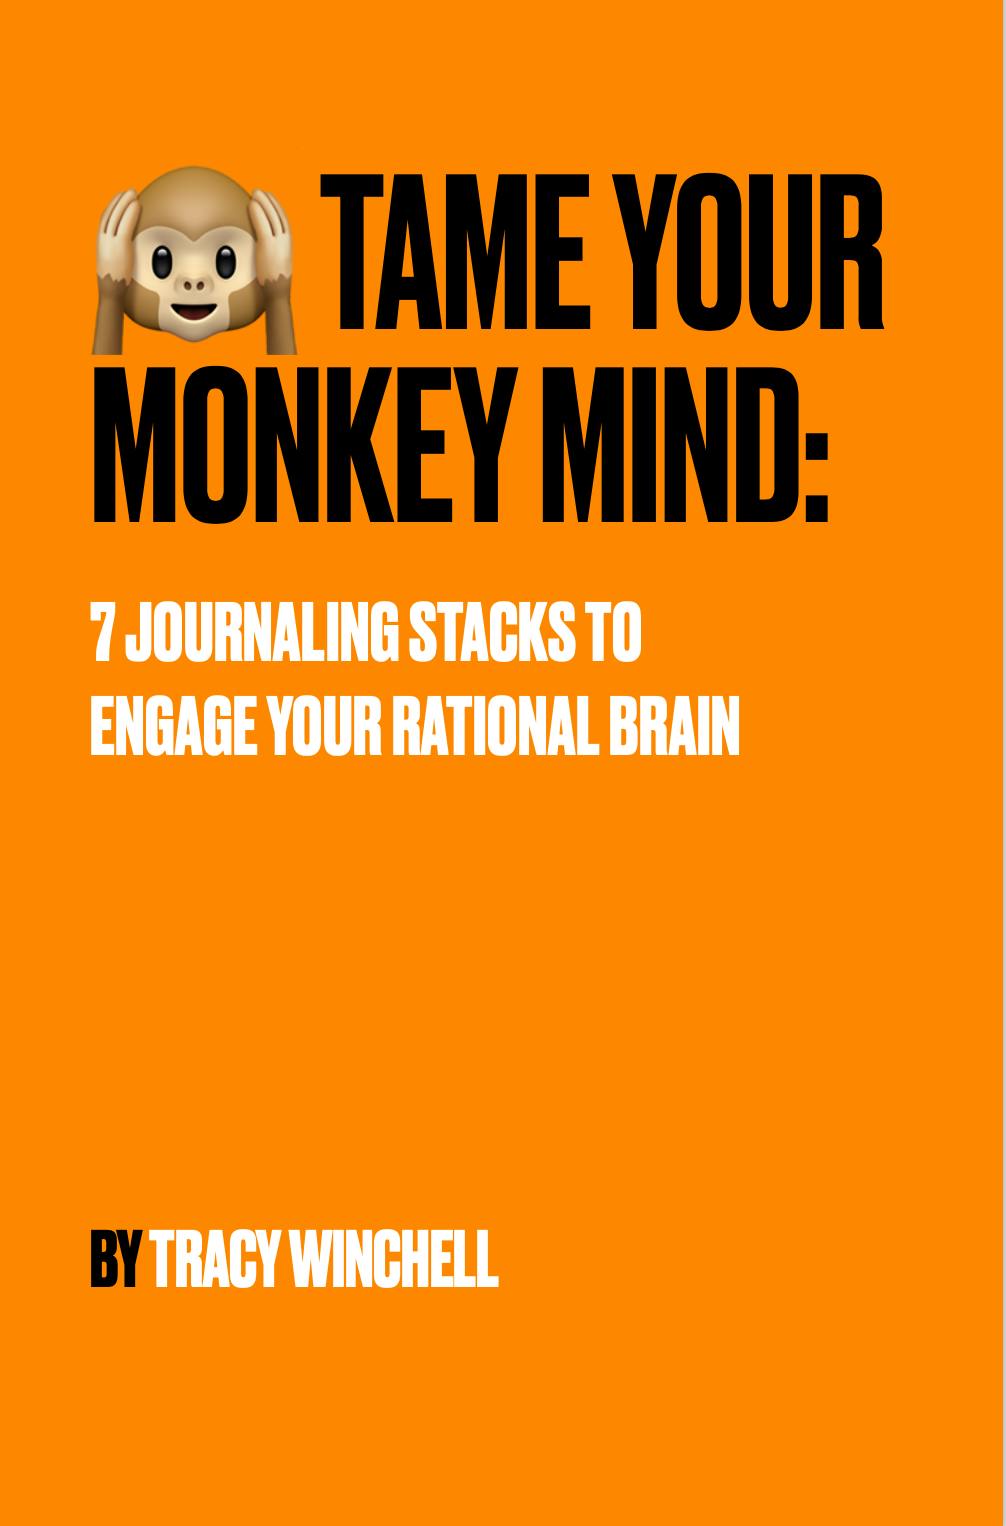 Tame Your Monkey Mind: 7 Journaling Stacks for Engaging Your Rational Mind